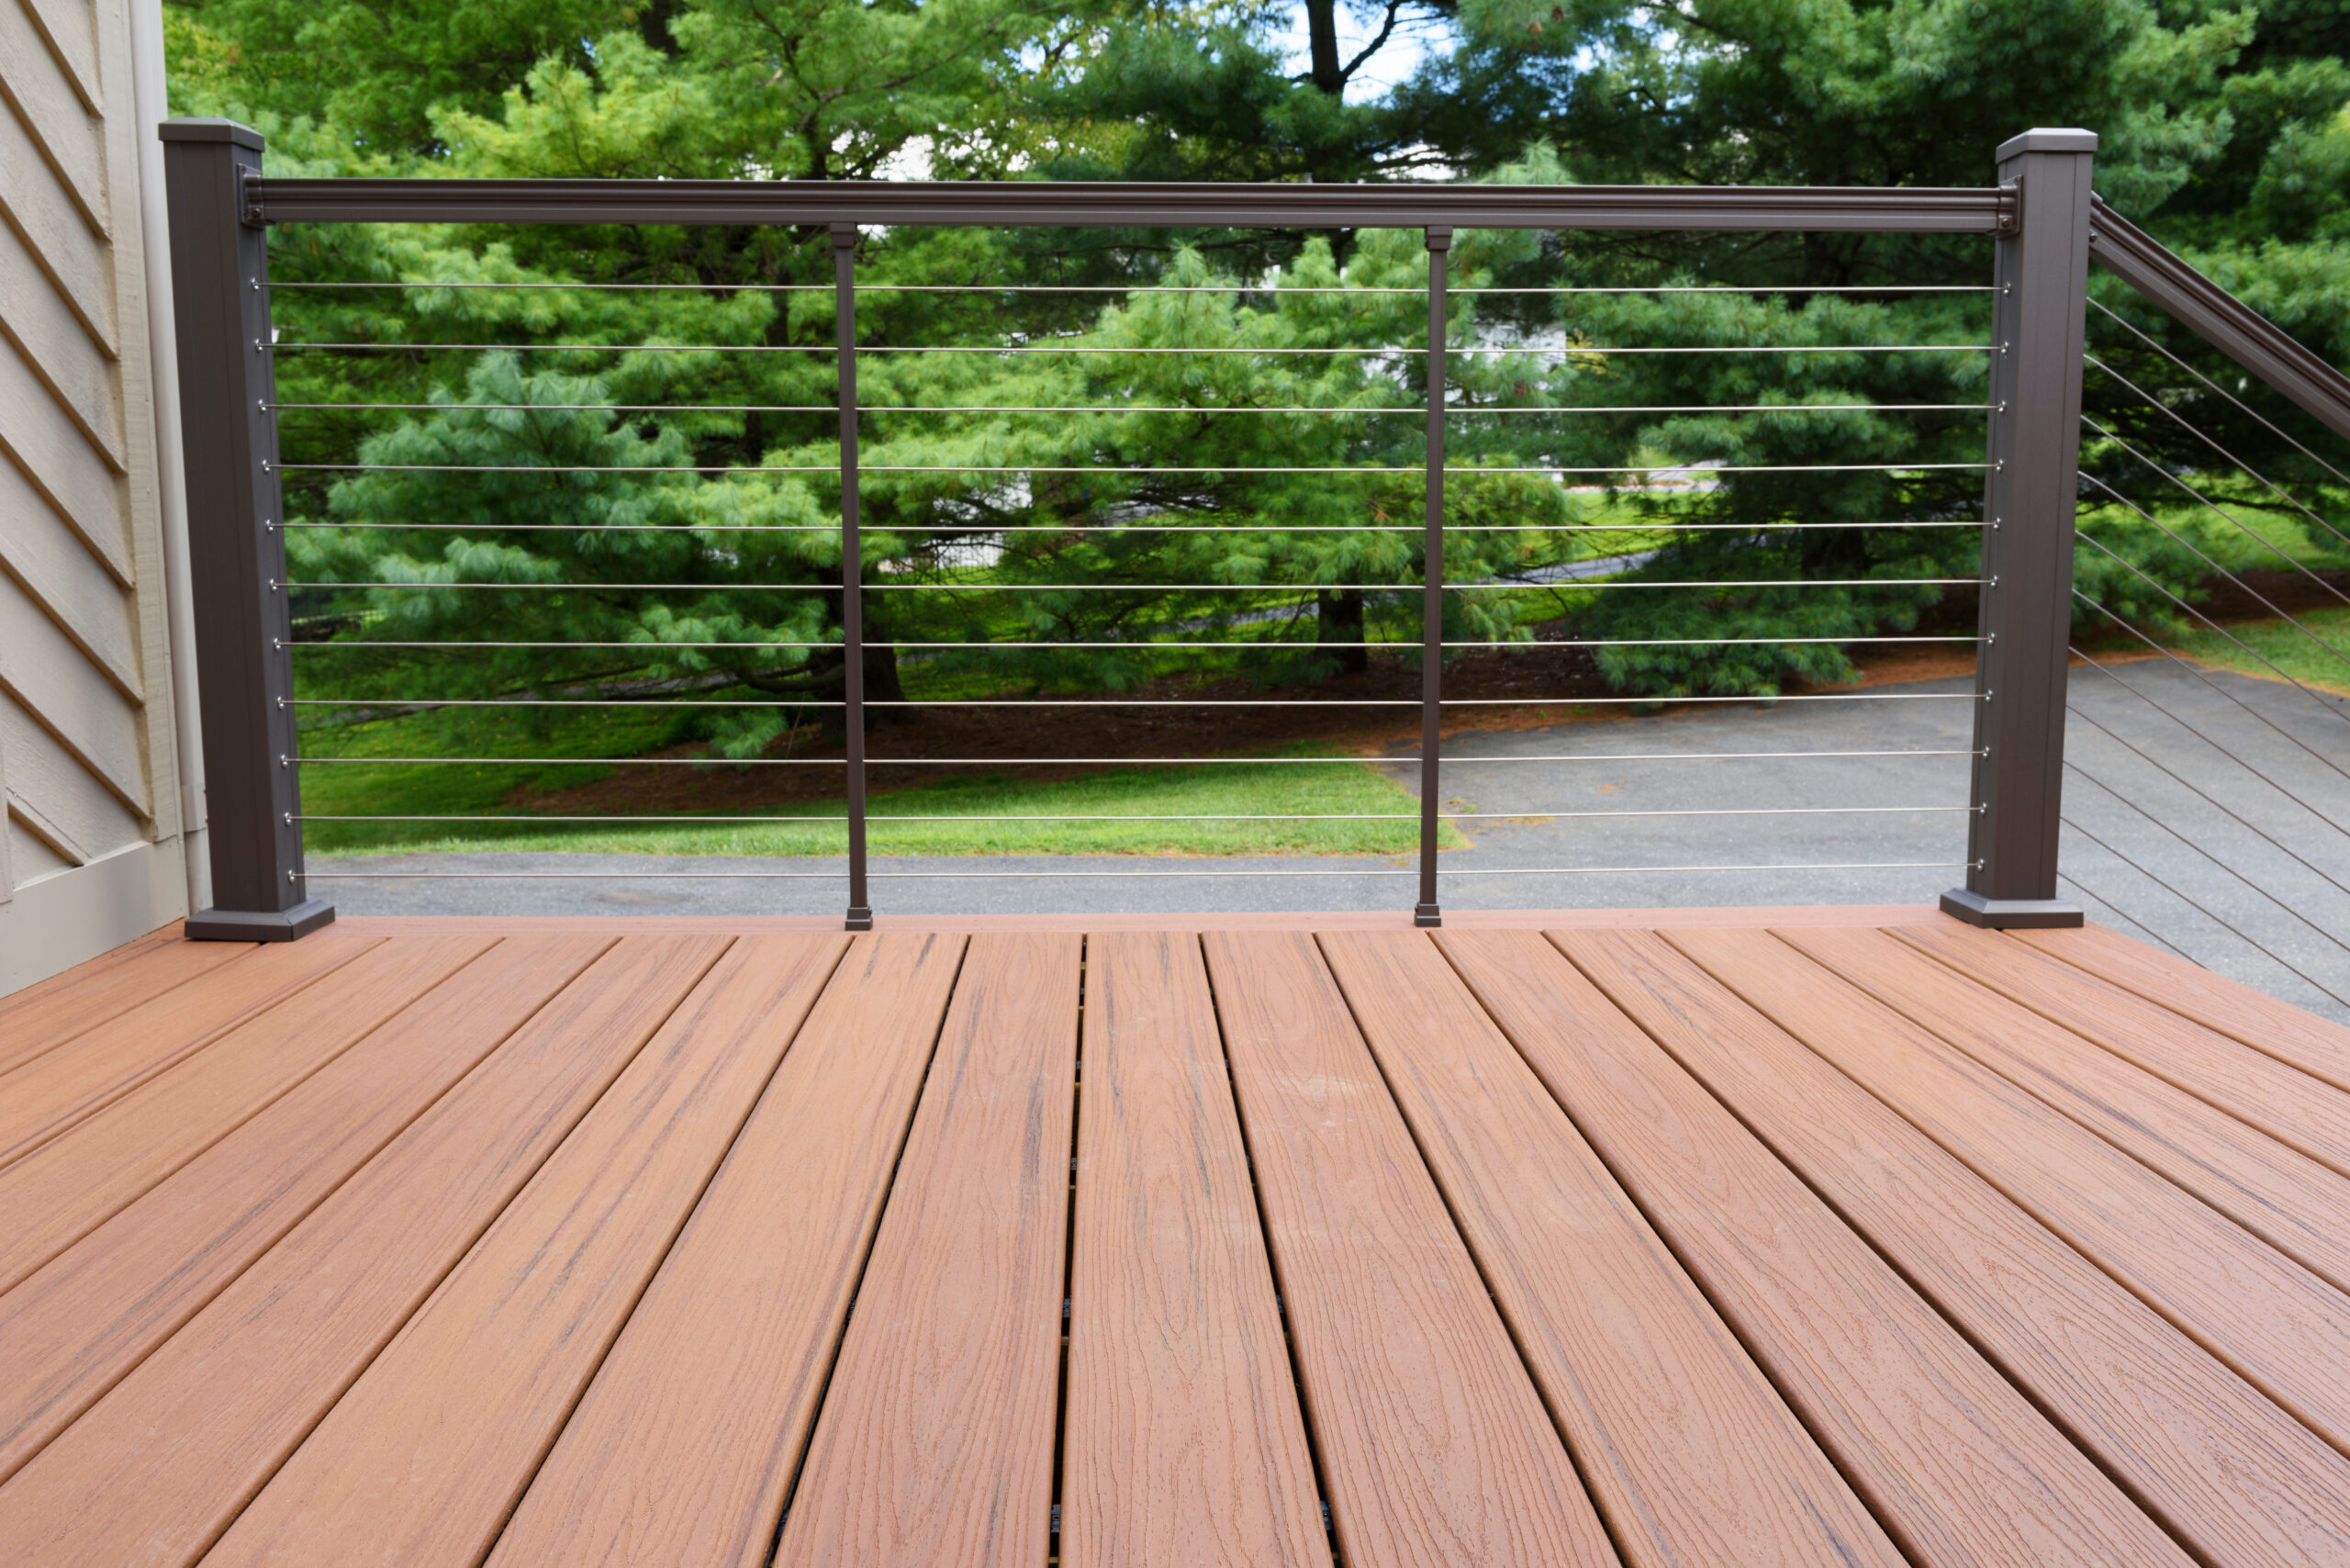 Trex decking with metal wire railings